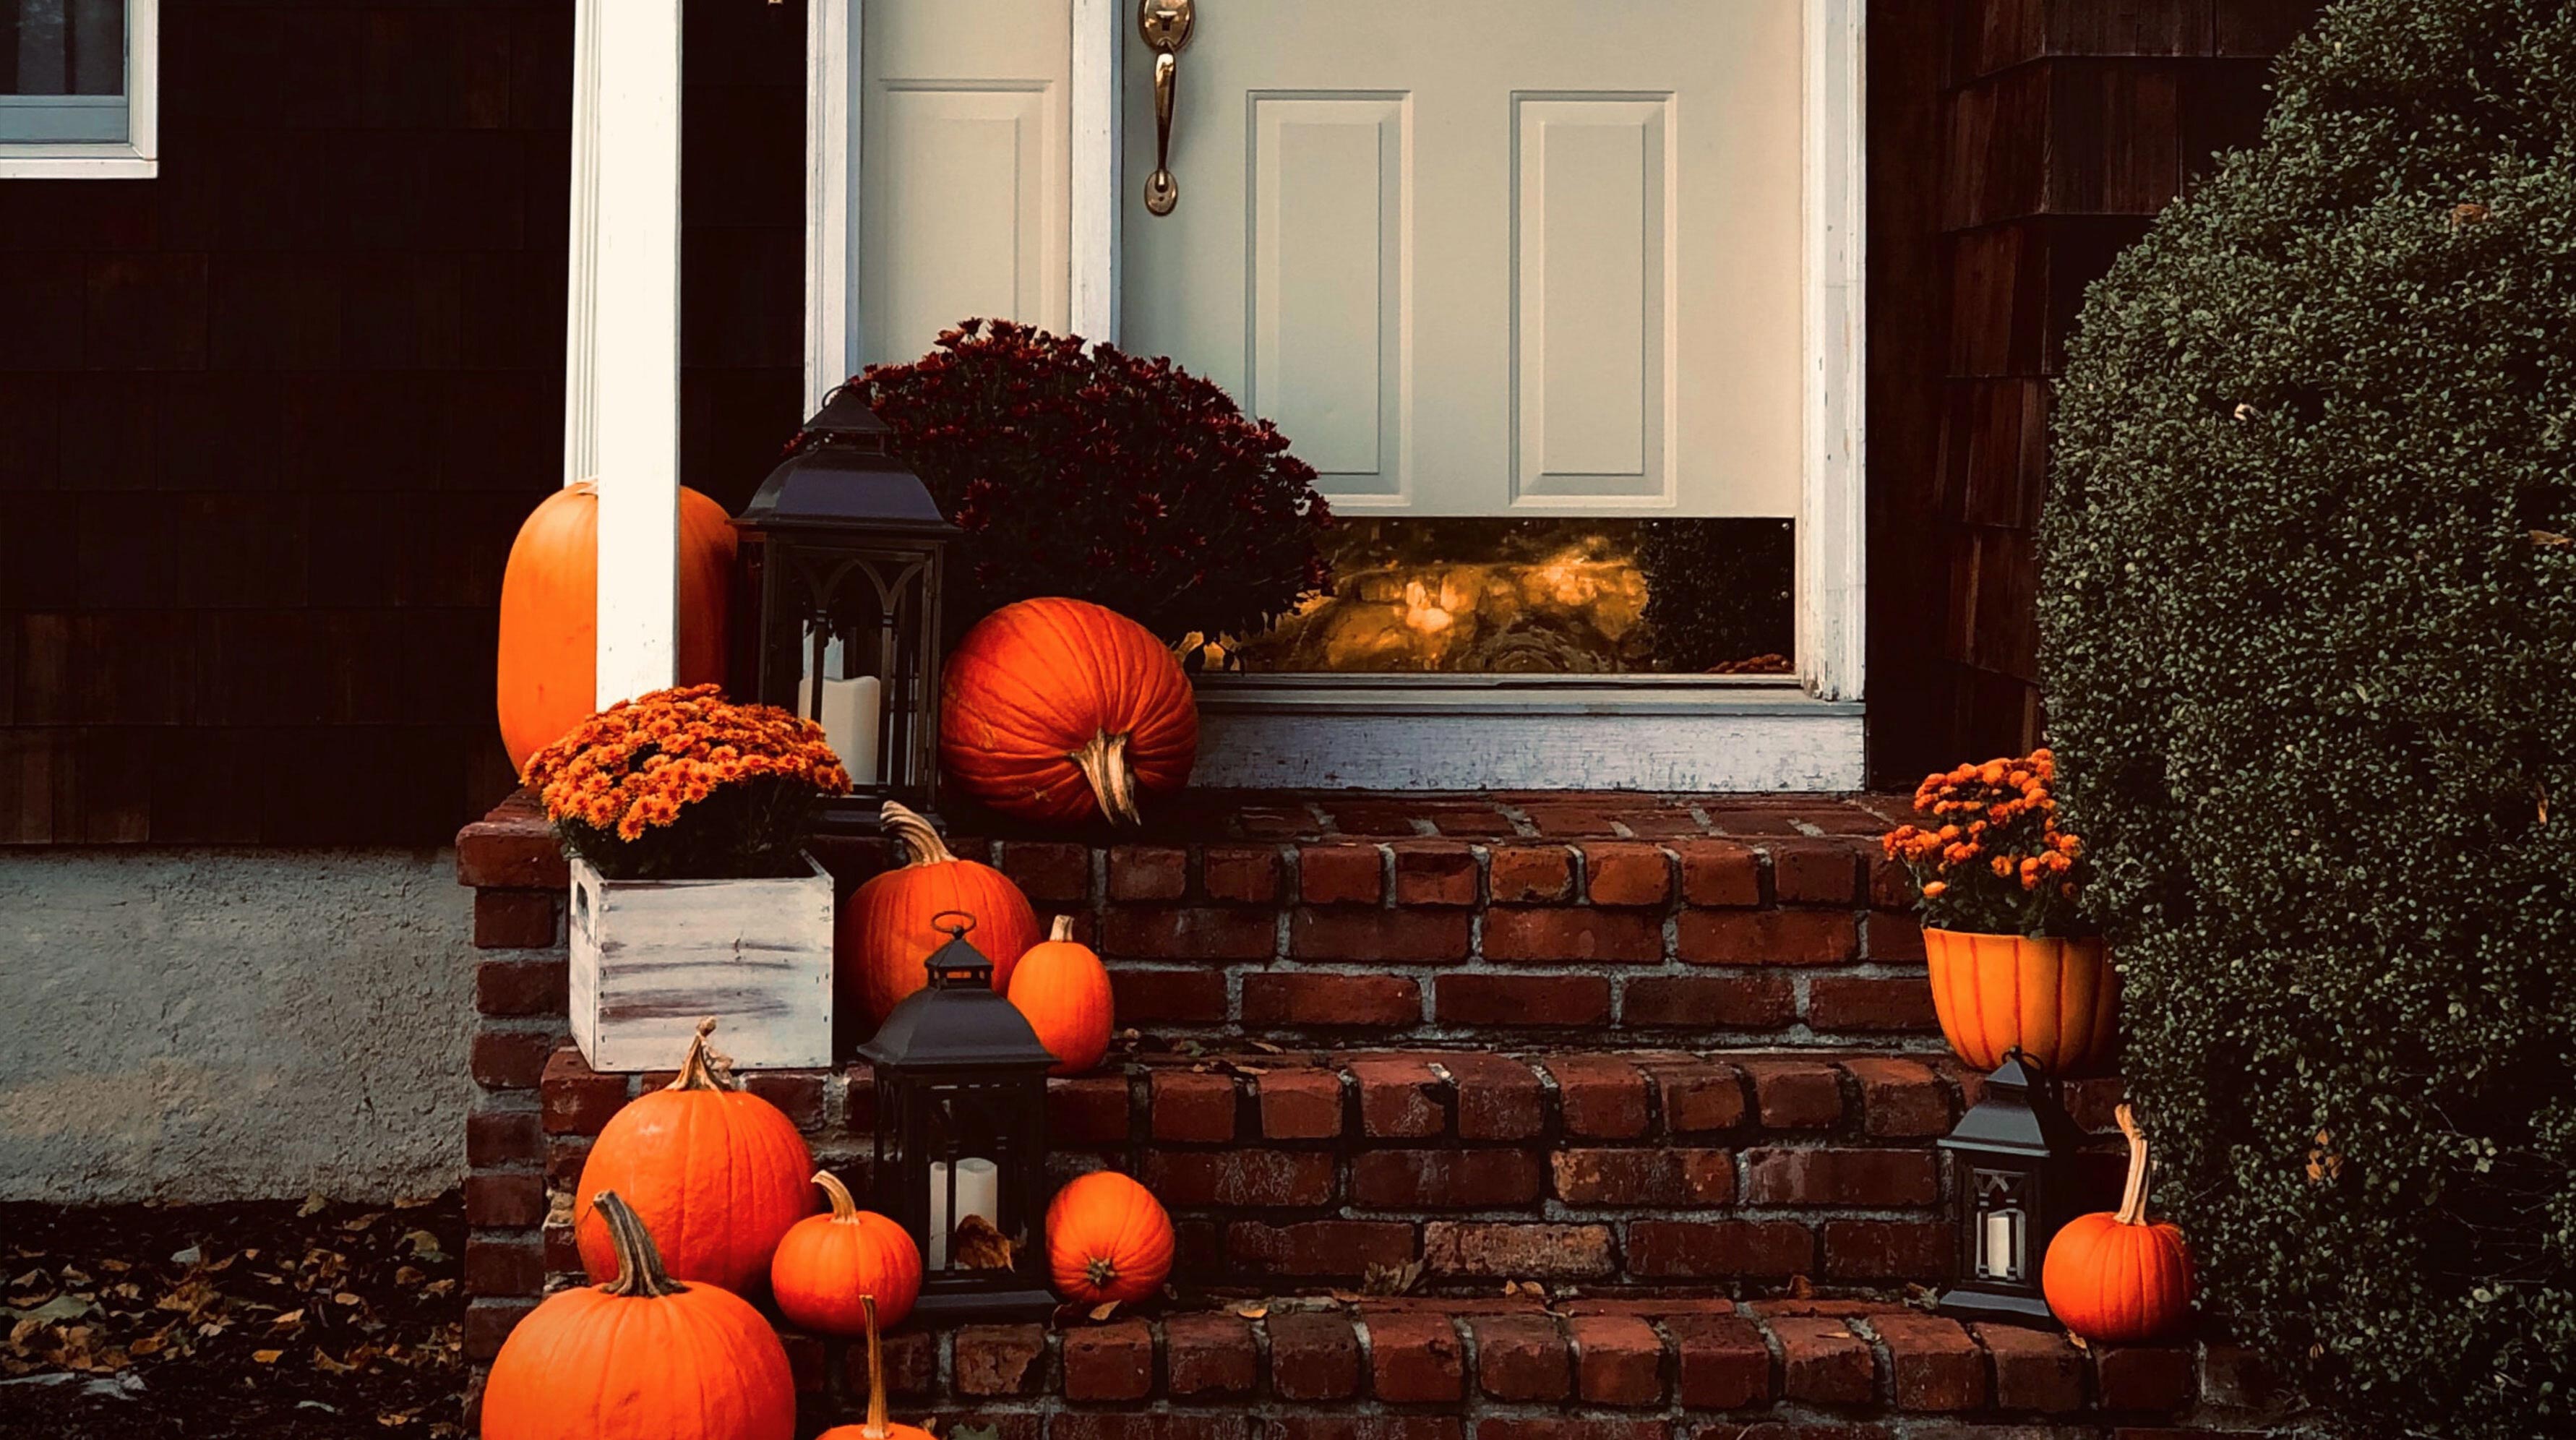 The front door to a house, surrounded by jack-o-lanterns, ready for trick-or-treaters